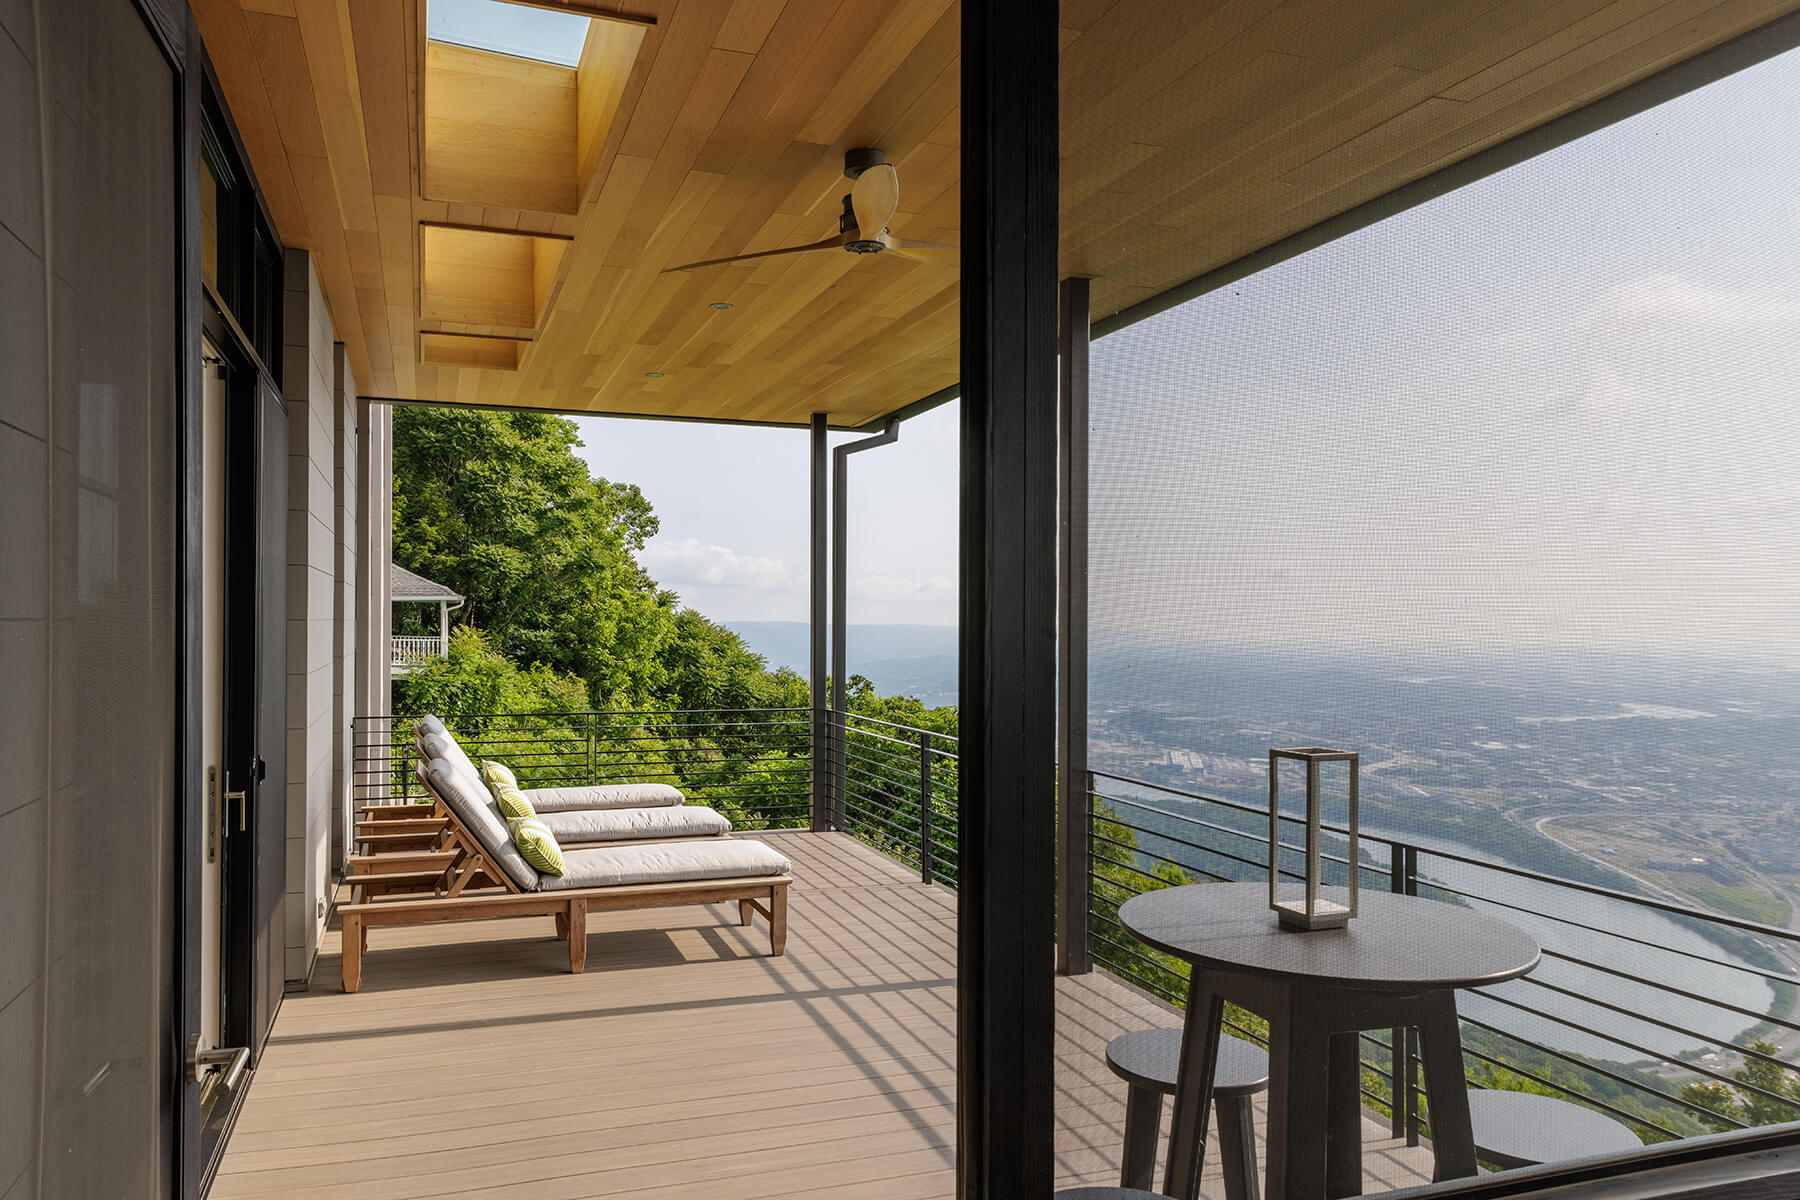 Lookout Mountain Residence Porch Overlooking Tennessee River Valley